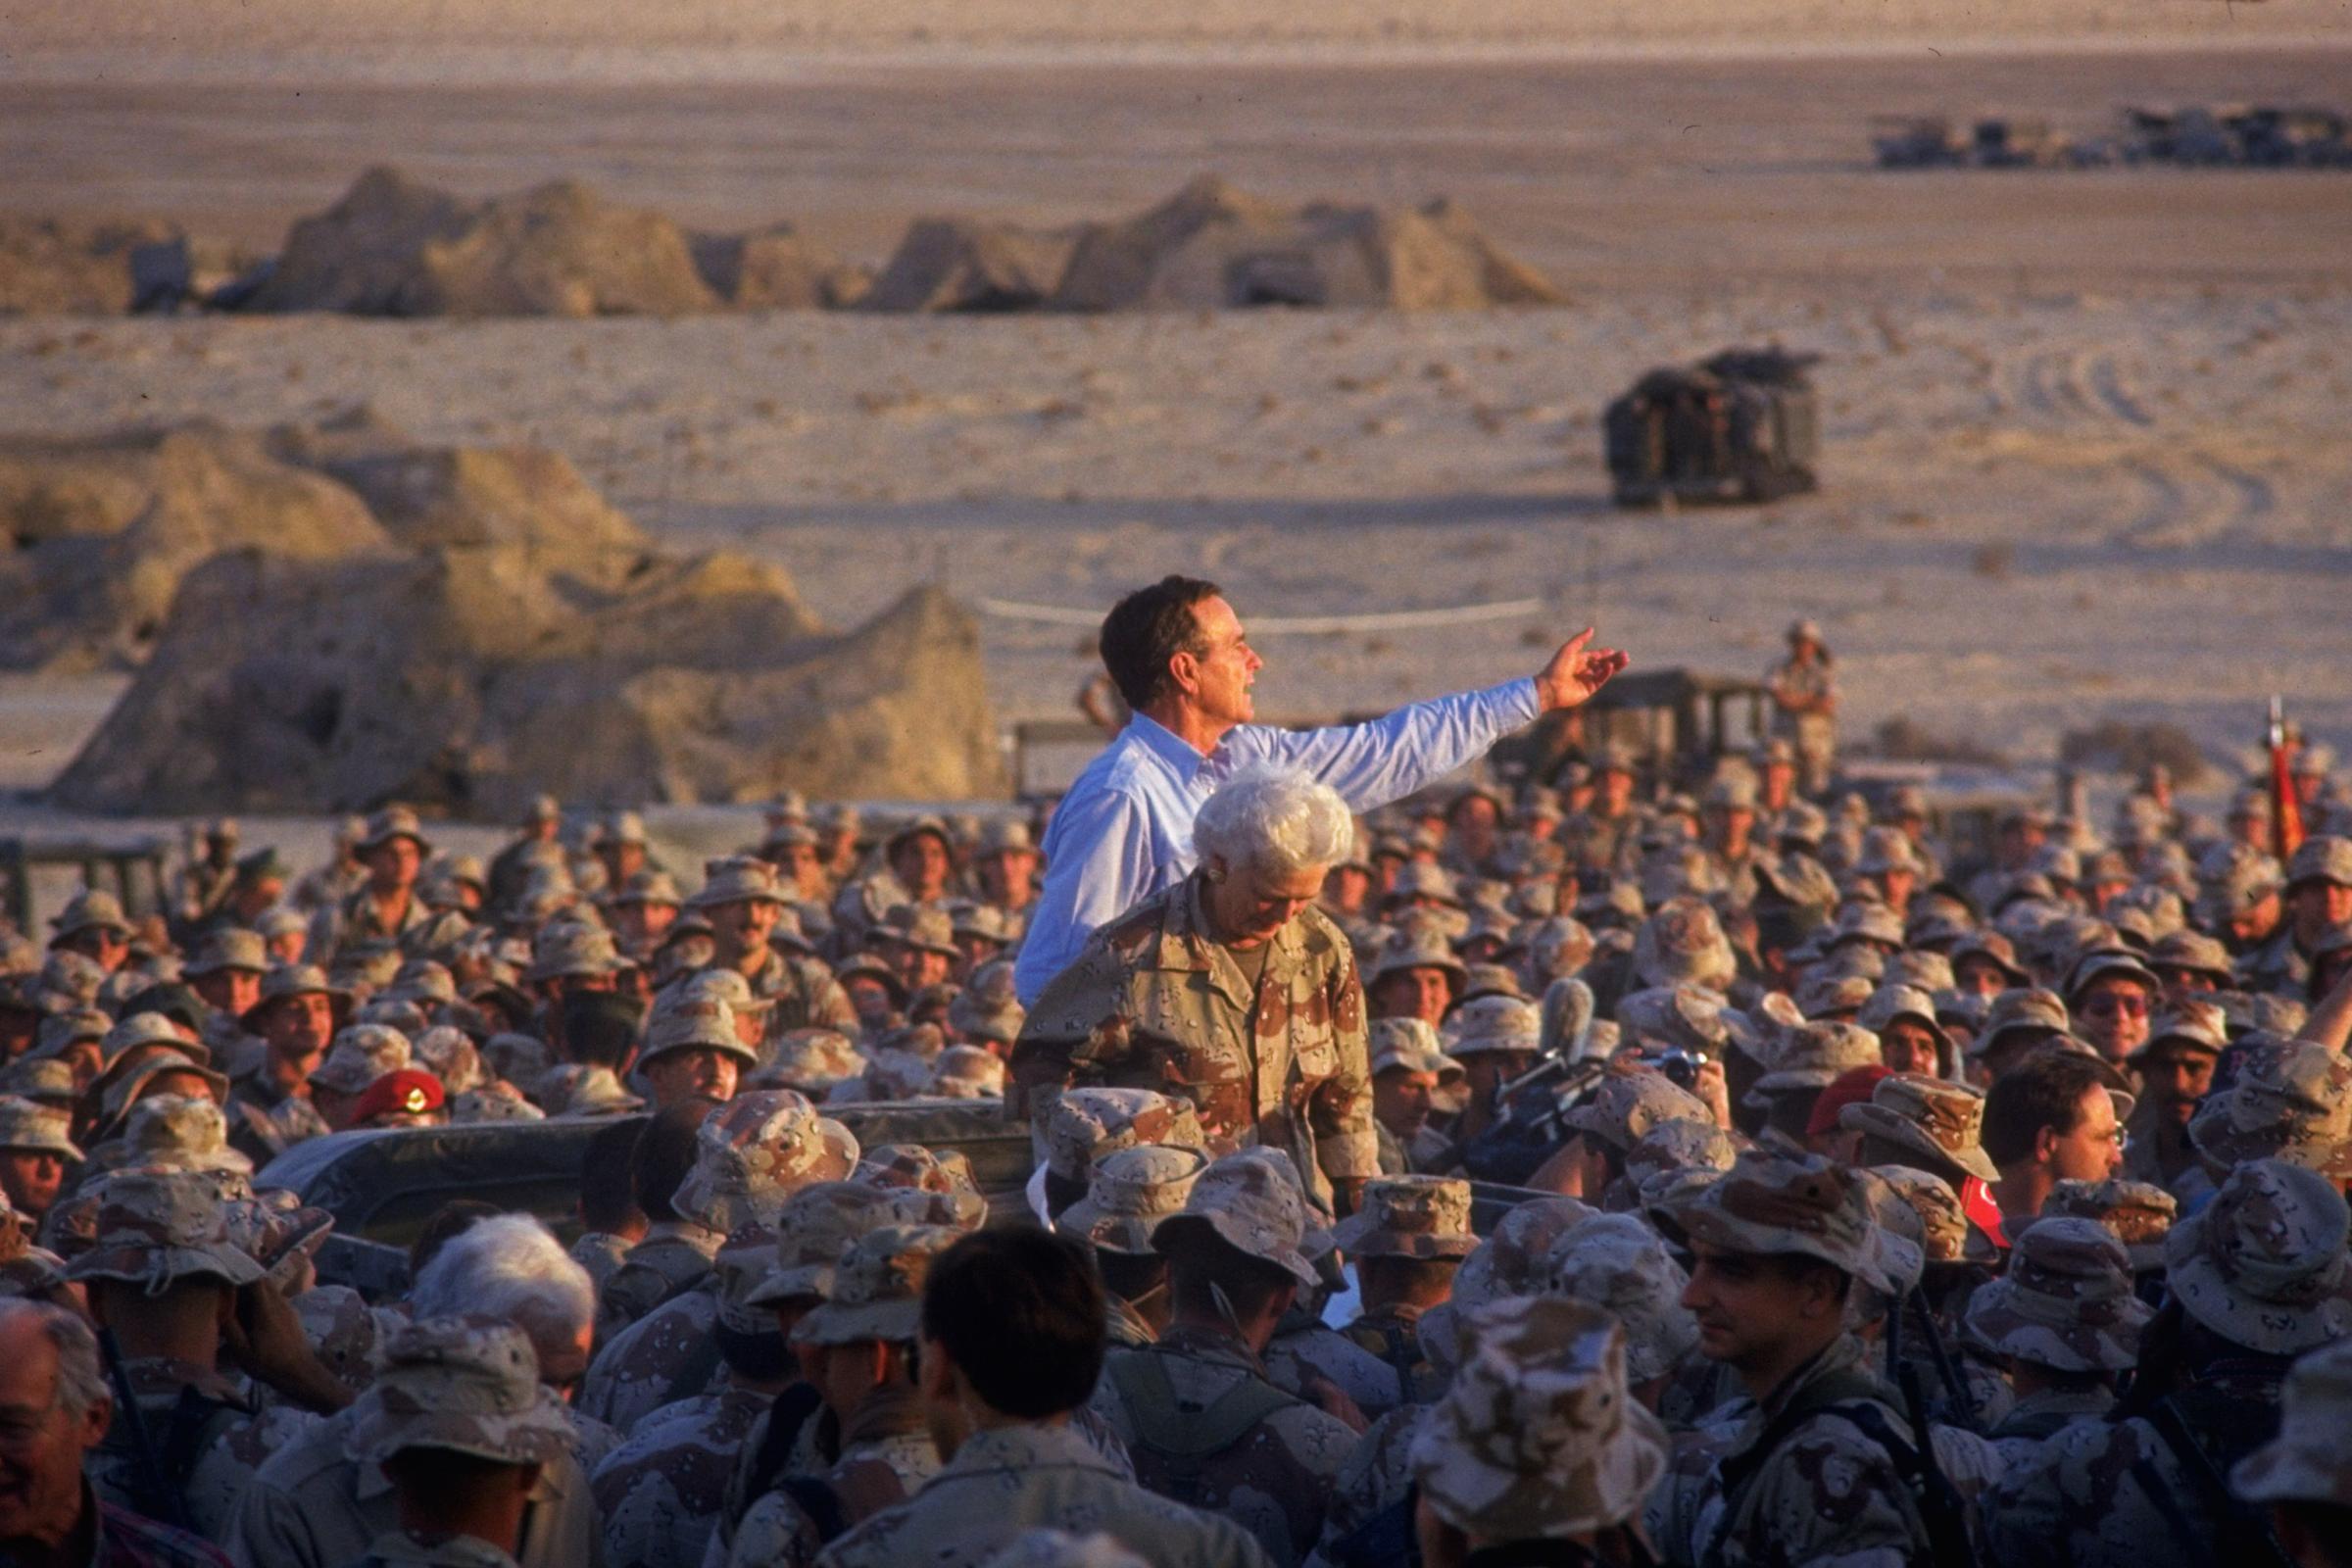 President George H.W. Bush and Barbara Bush poised above a crowd of First Marine Division Desert Command Post marines on thanksgiving during the Gulf Crisis on November 22, 1990.